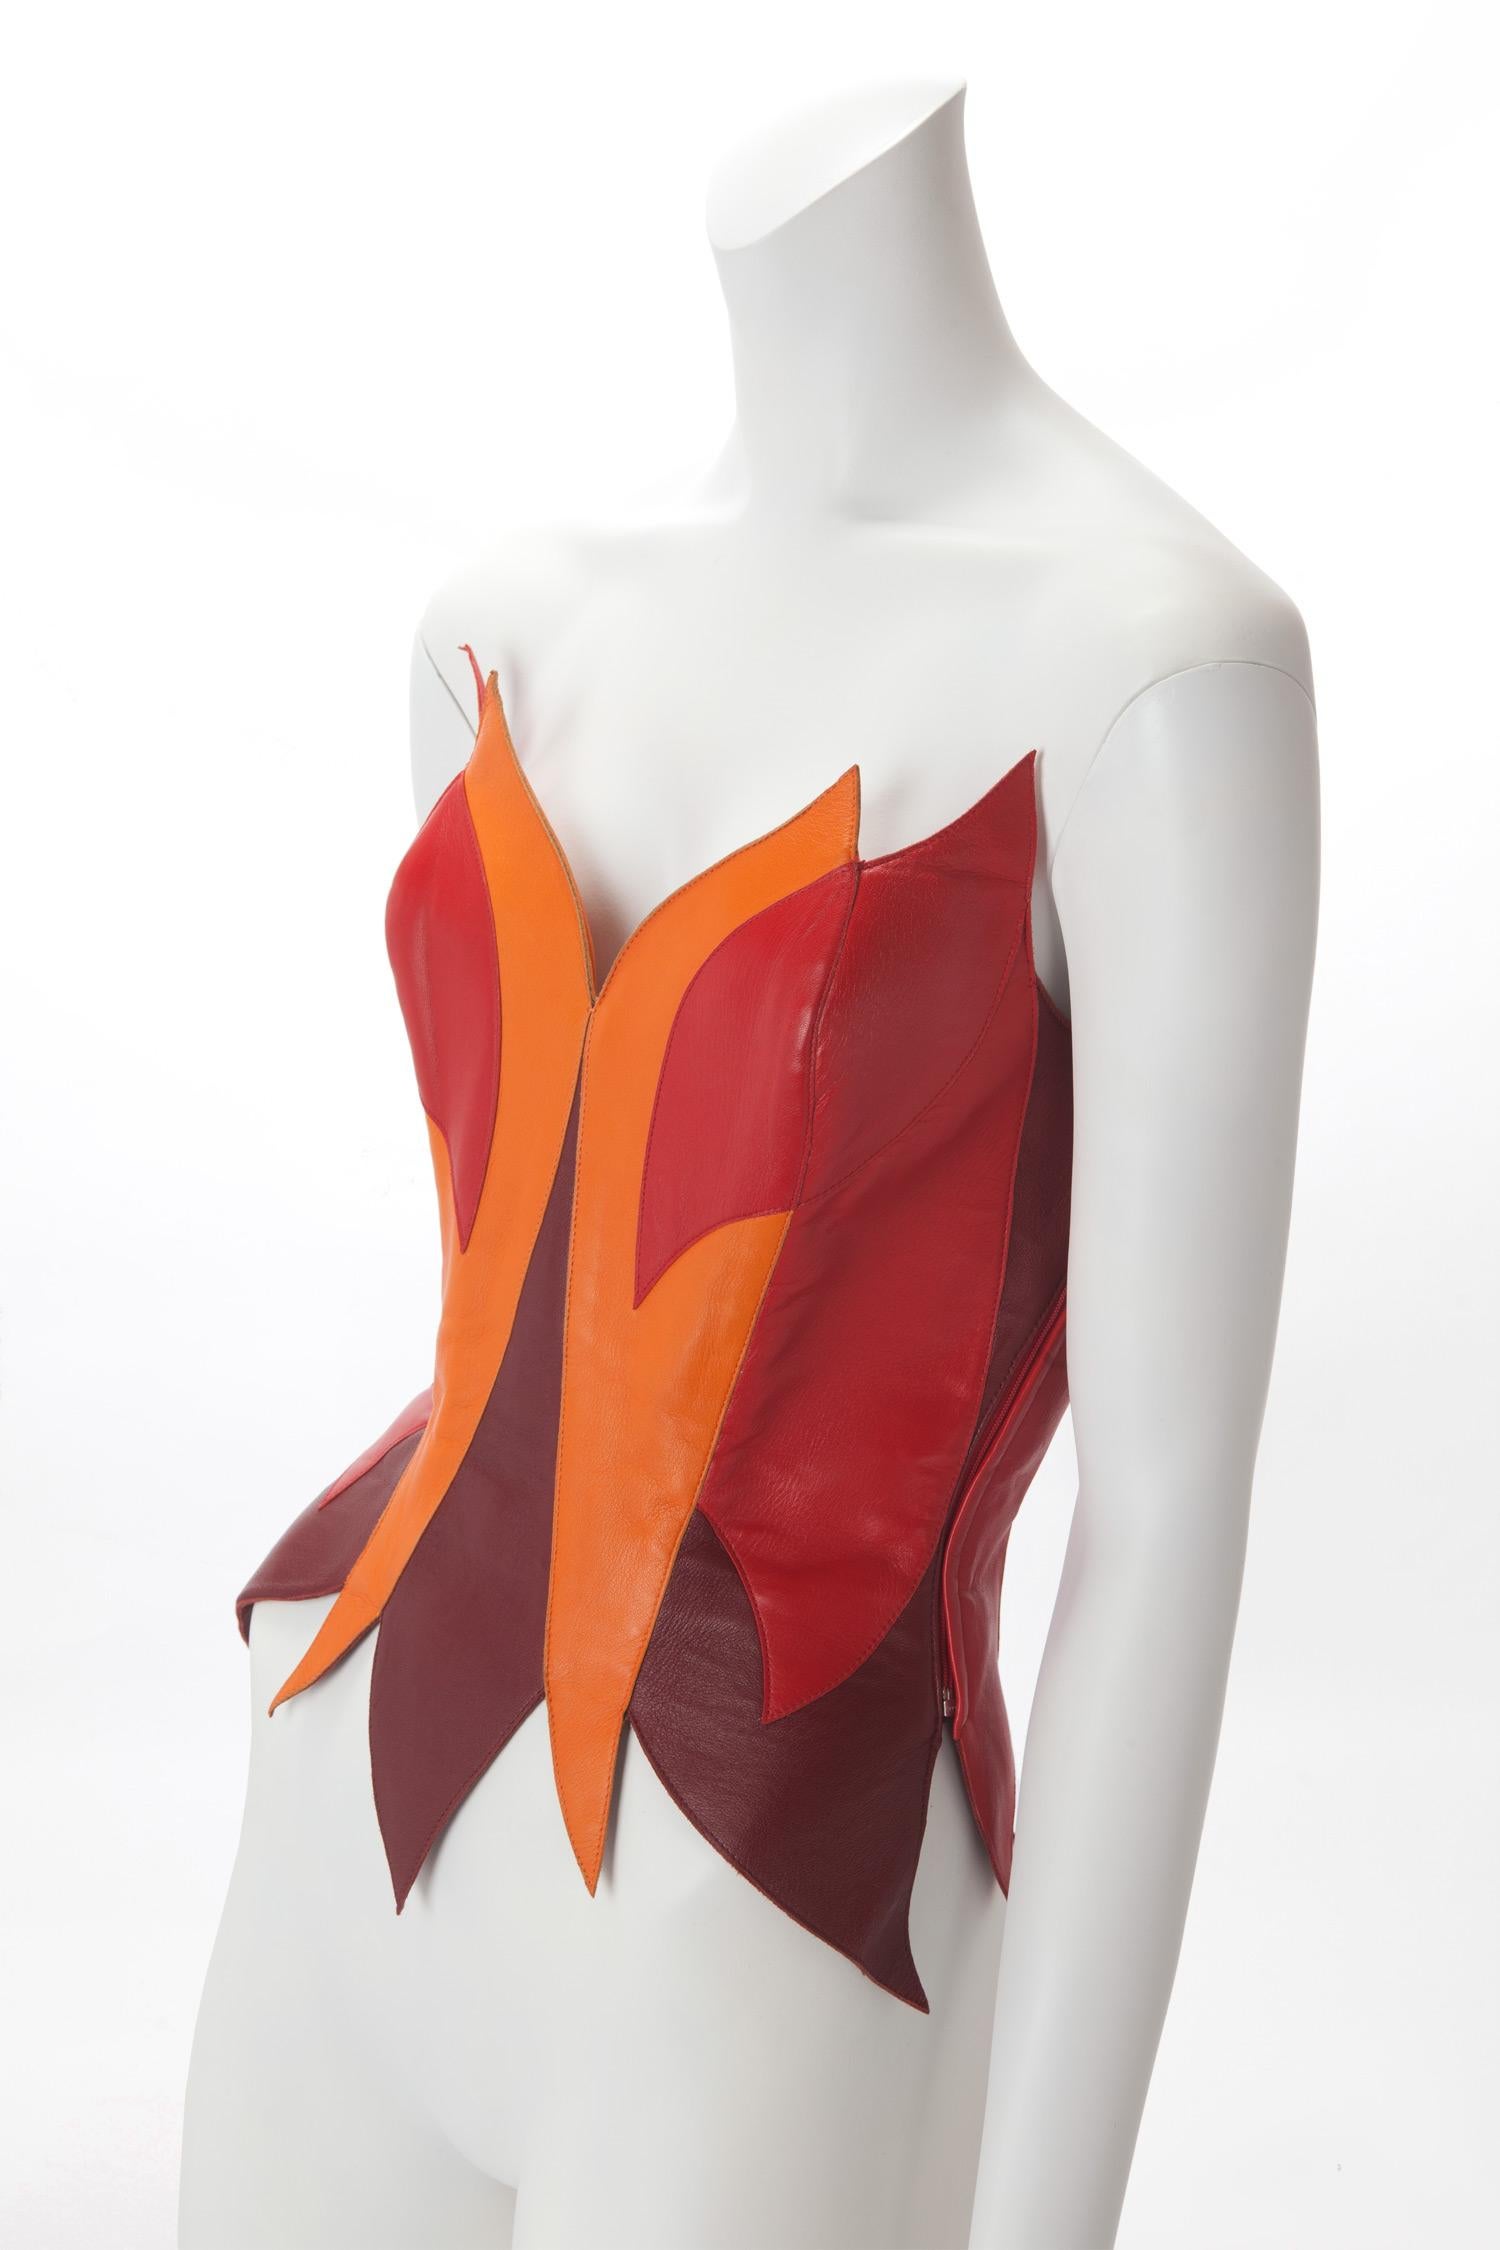 Rare Thierry Mugler Couture Leather Flame Bustier Museum c. 1980s; Colorblock leather flame pattern; Red silk lining; Side zipper closure. US size 4